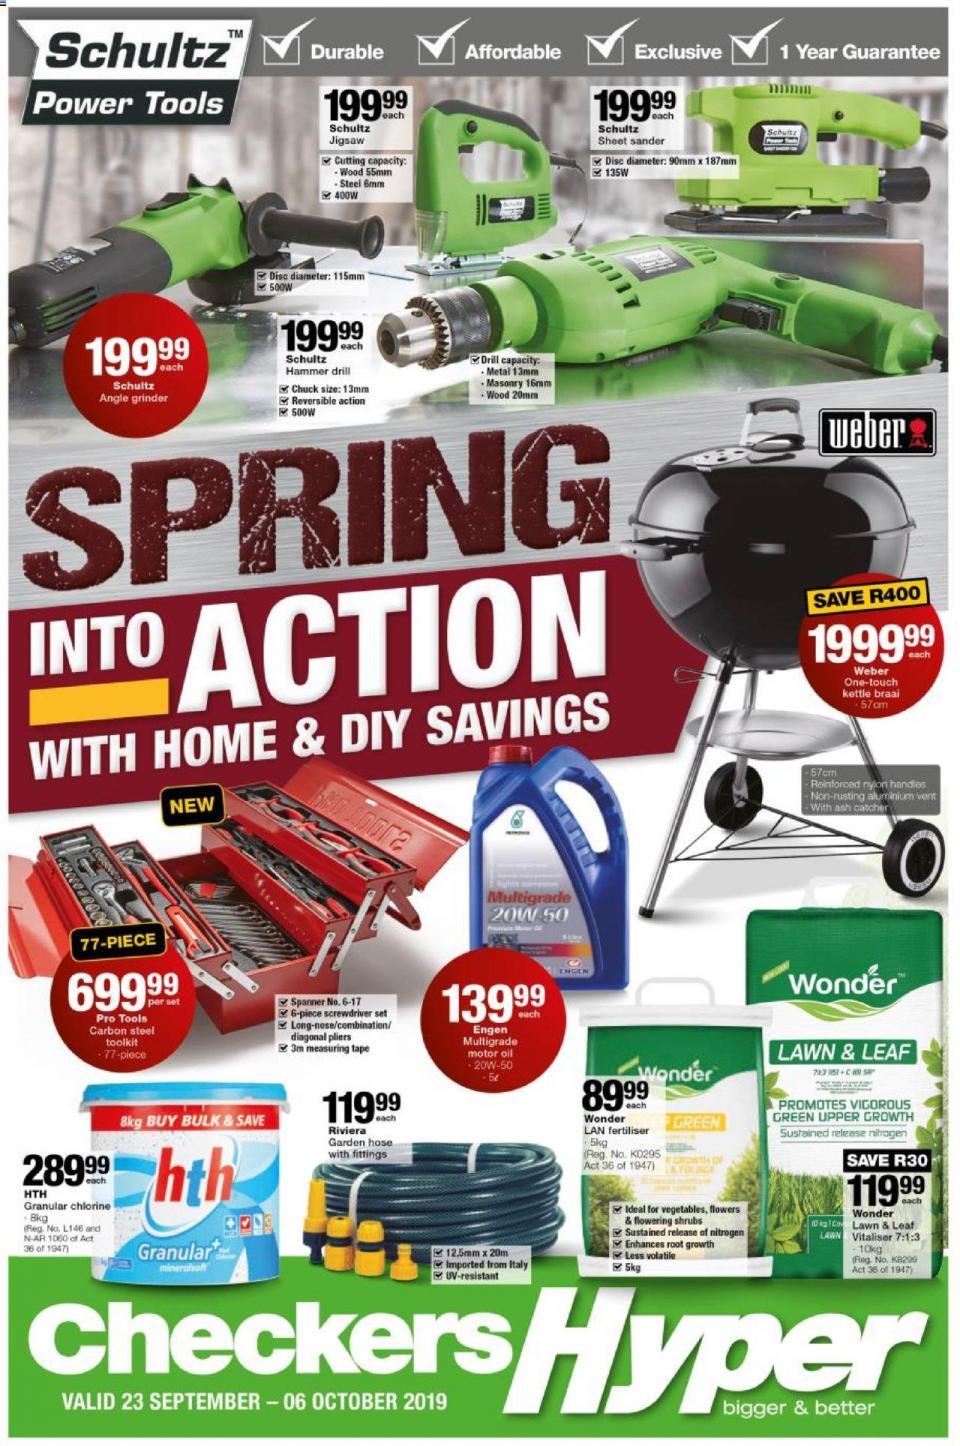 Checkers Specials Hyper Spring Promotion 23 September 2019